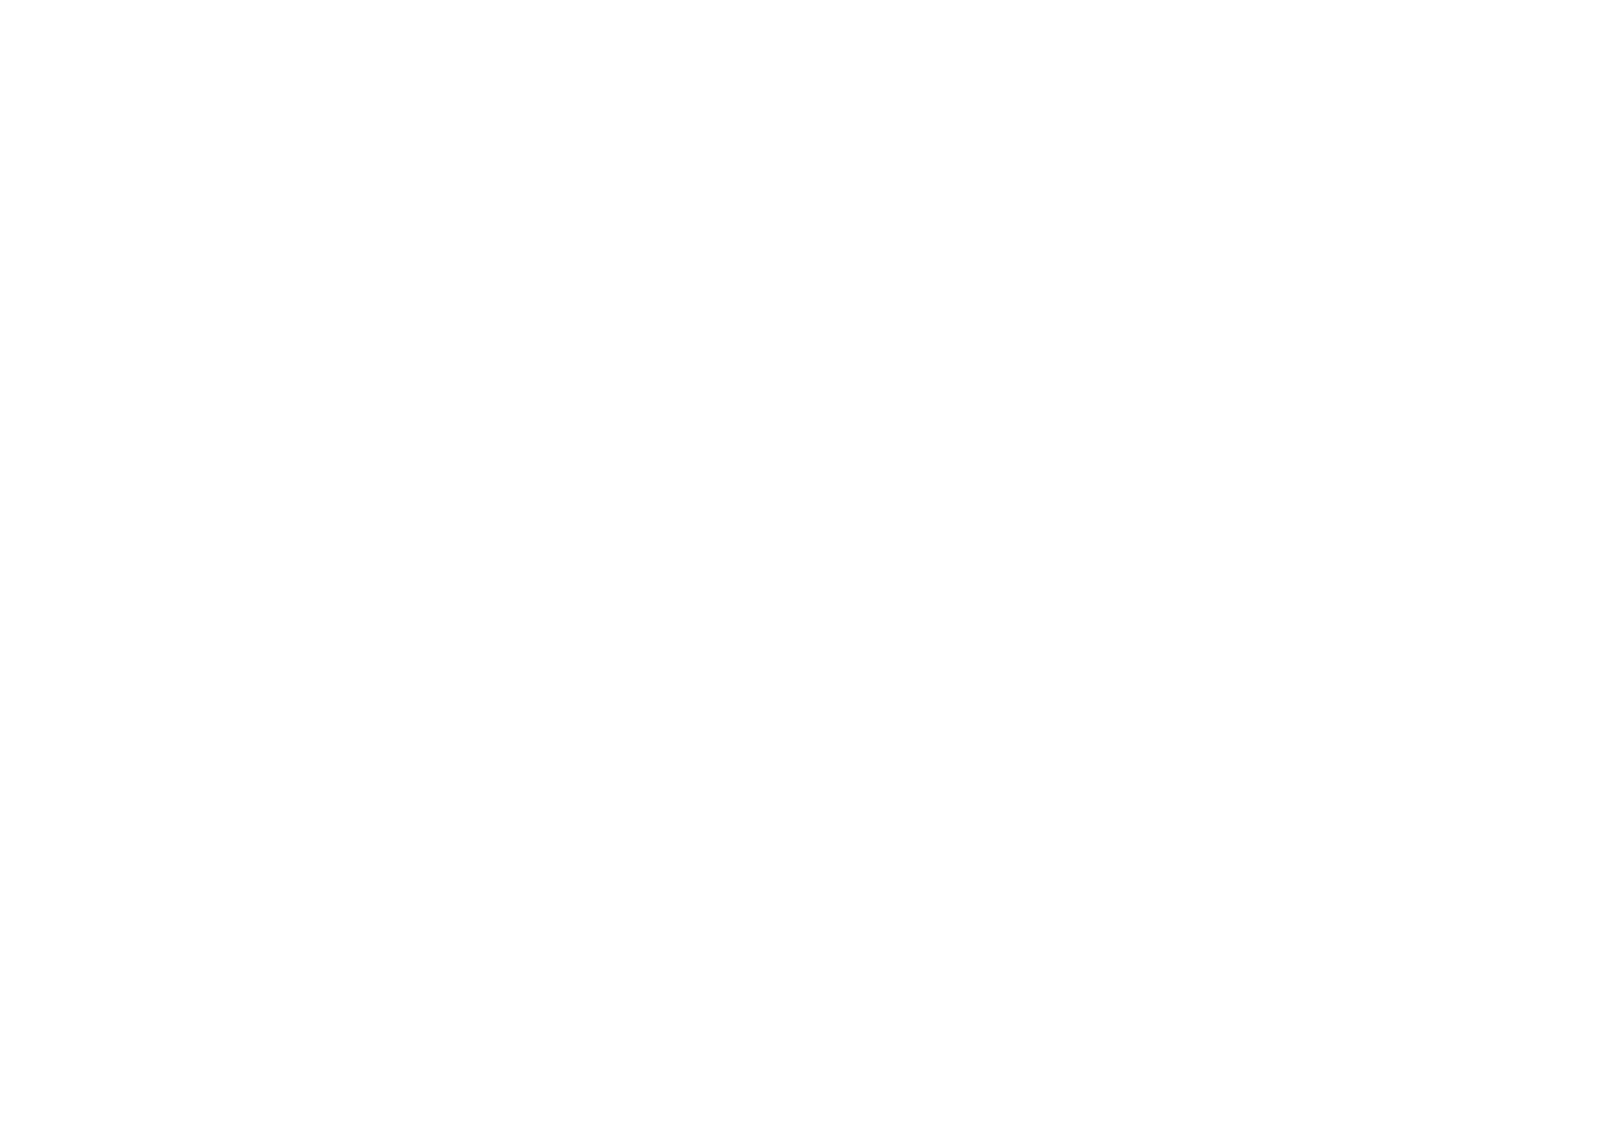 The Vita Coco Company logo in transparent PNG and vectorized SVG formats